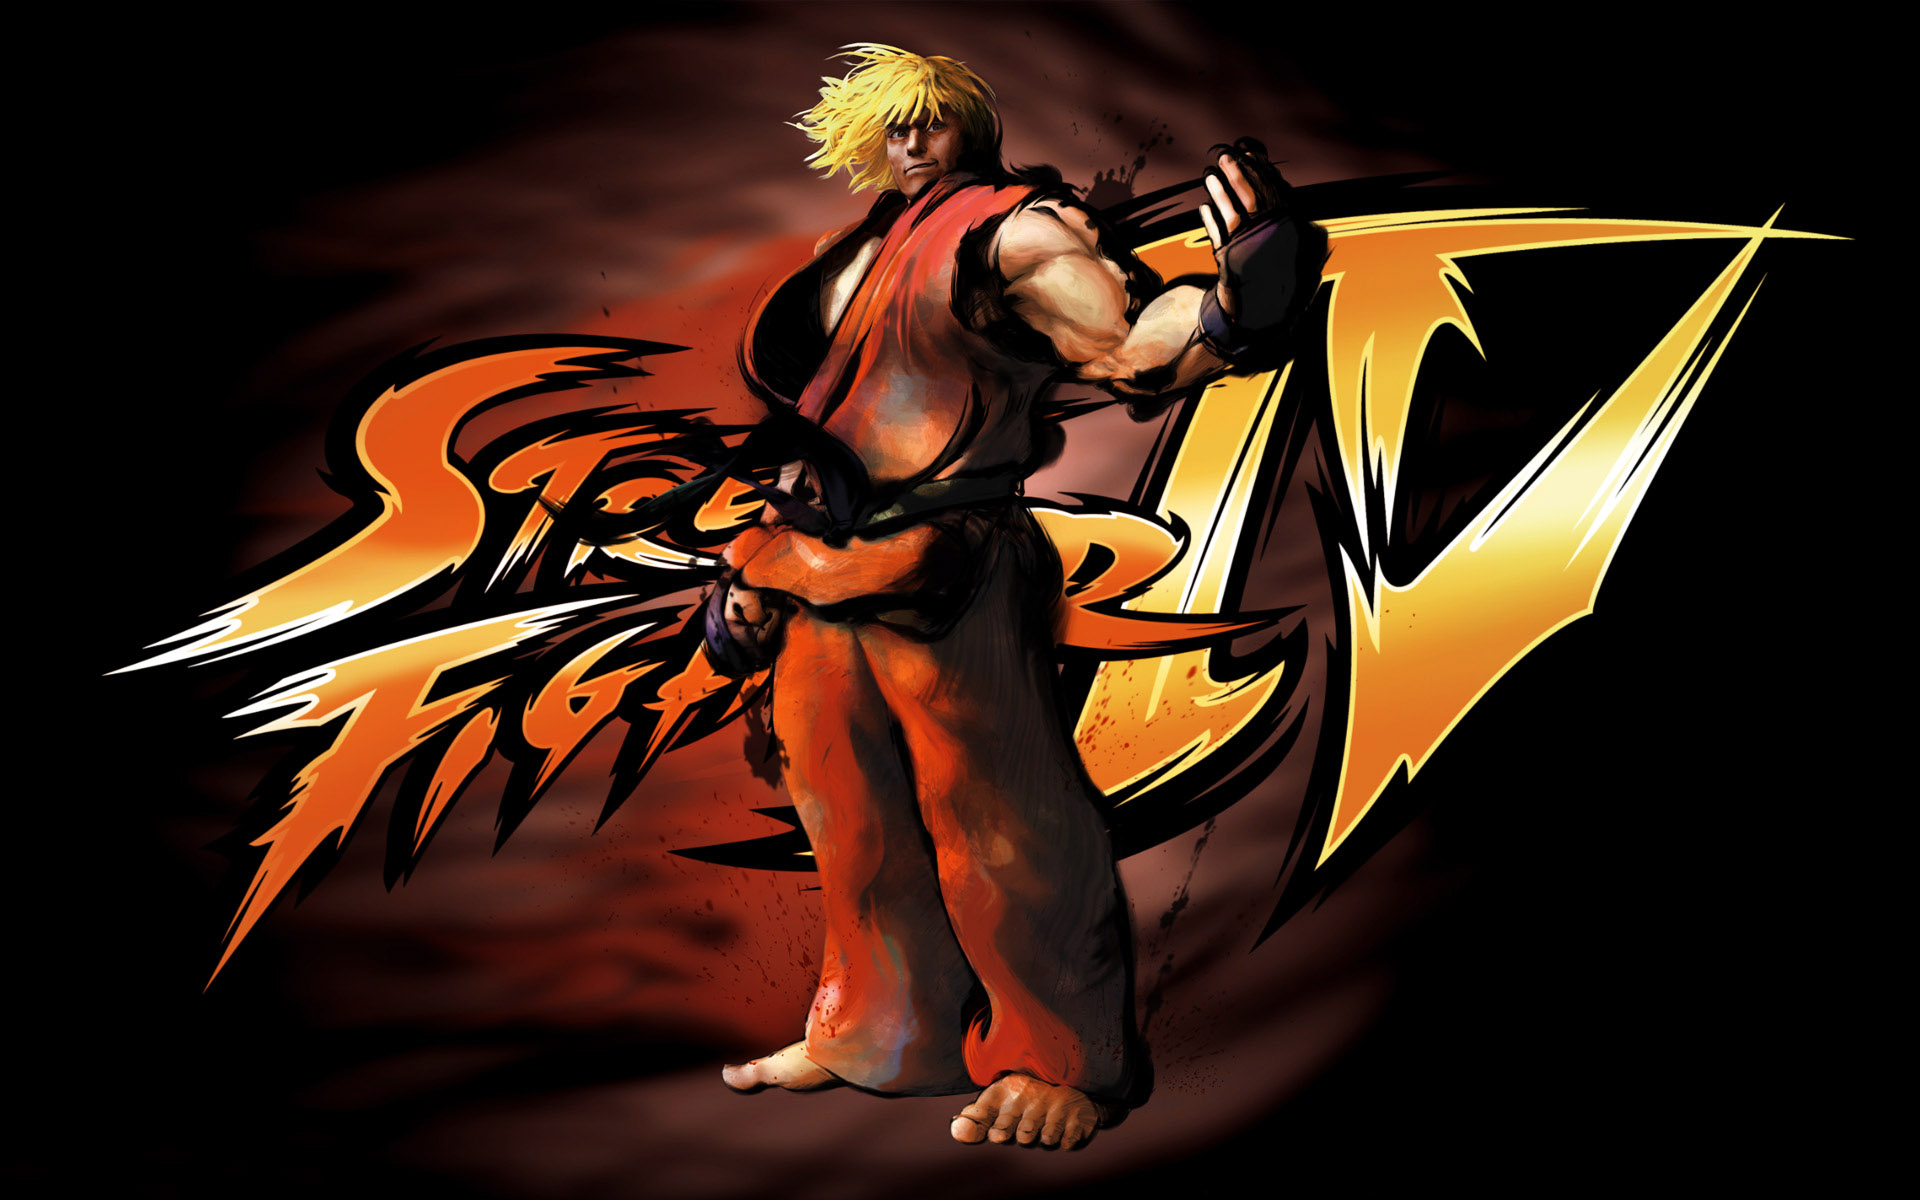 Previous, Games - Street Fighter 4 Heavy fighter wallpaper